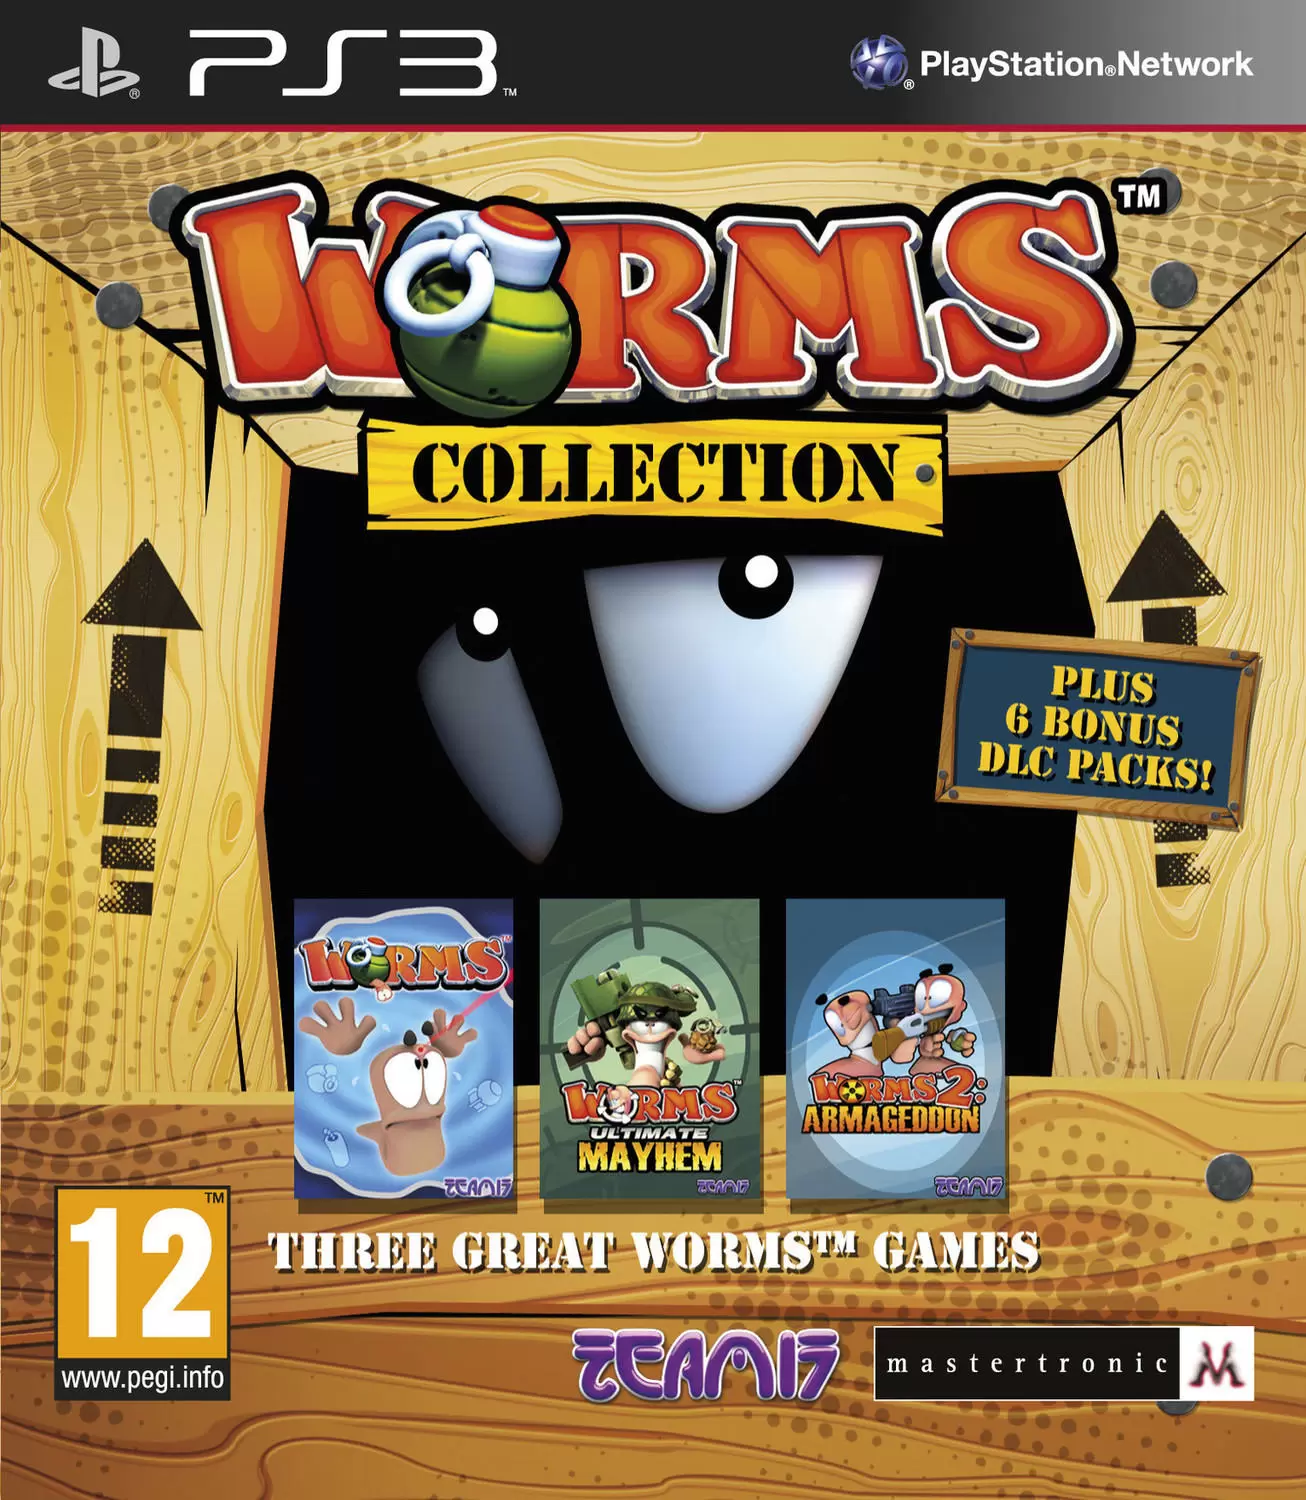 PS3 Games - Worms Collection